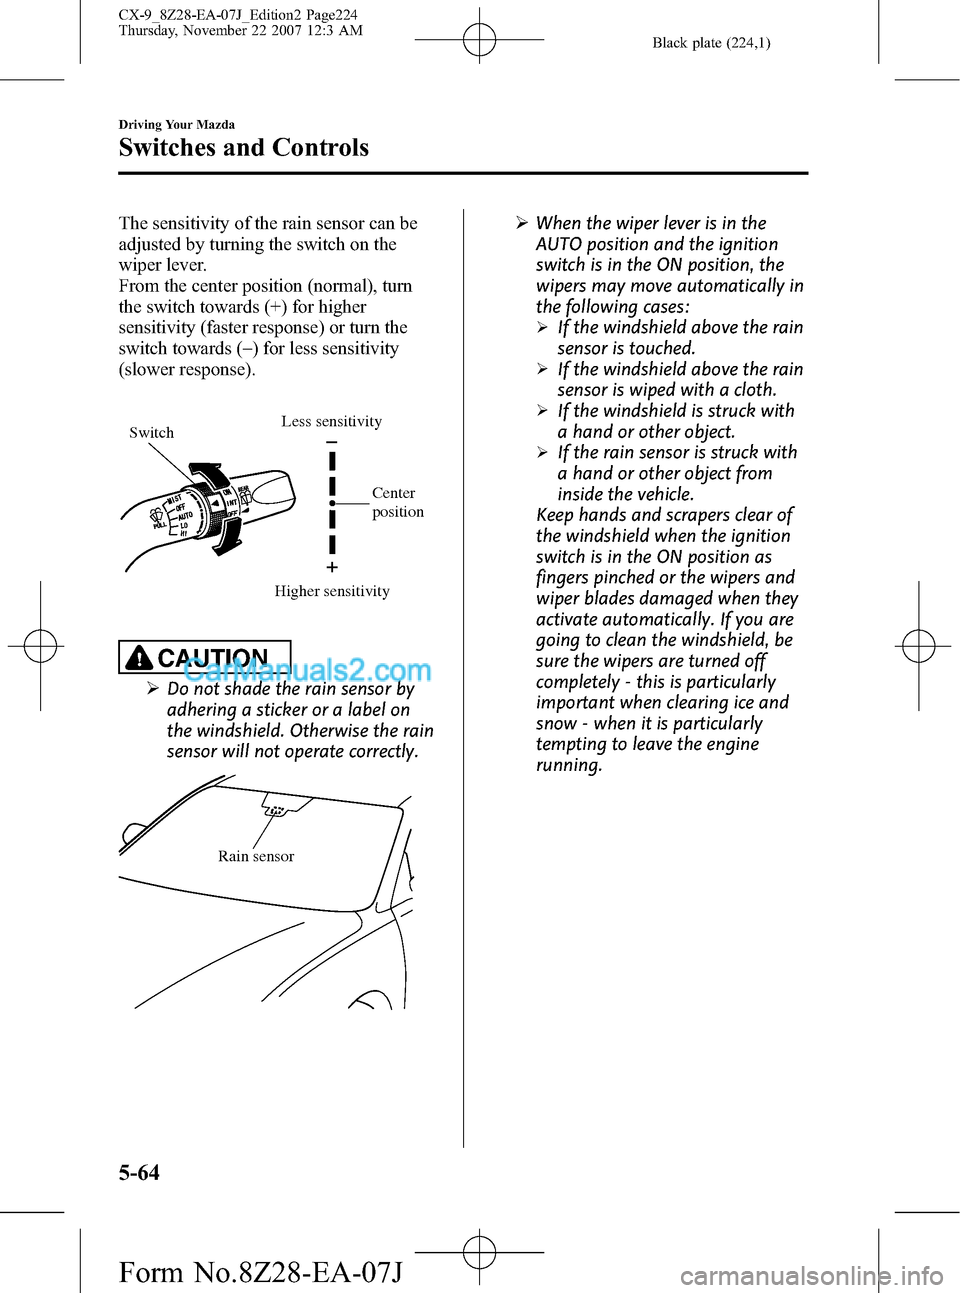 MAZDA MODEL CX-9 2008  Owners Manual (in English) Black plate (224,1)
The sensitivity of the rain sensor can be
adjusted by turning the switch on the
wiper lever.
From the center position (normal), turn
the switch towards (+) for higher
sensitivity (